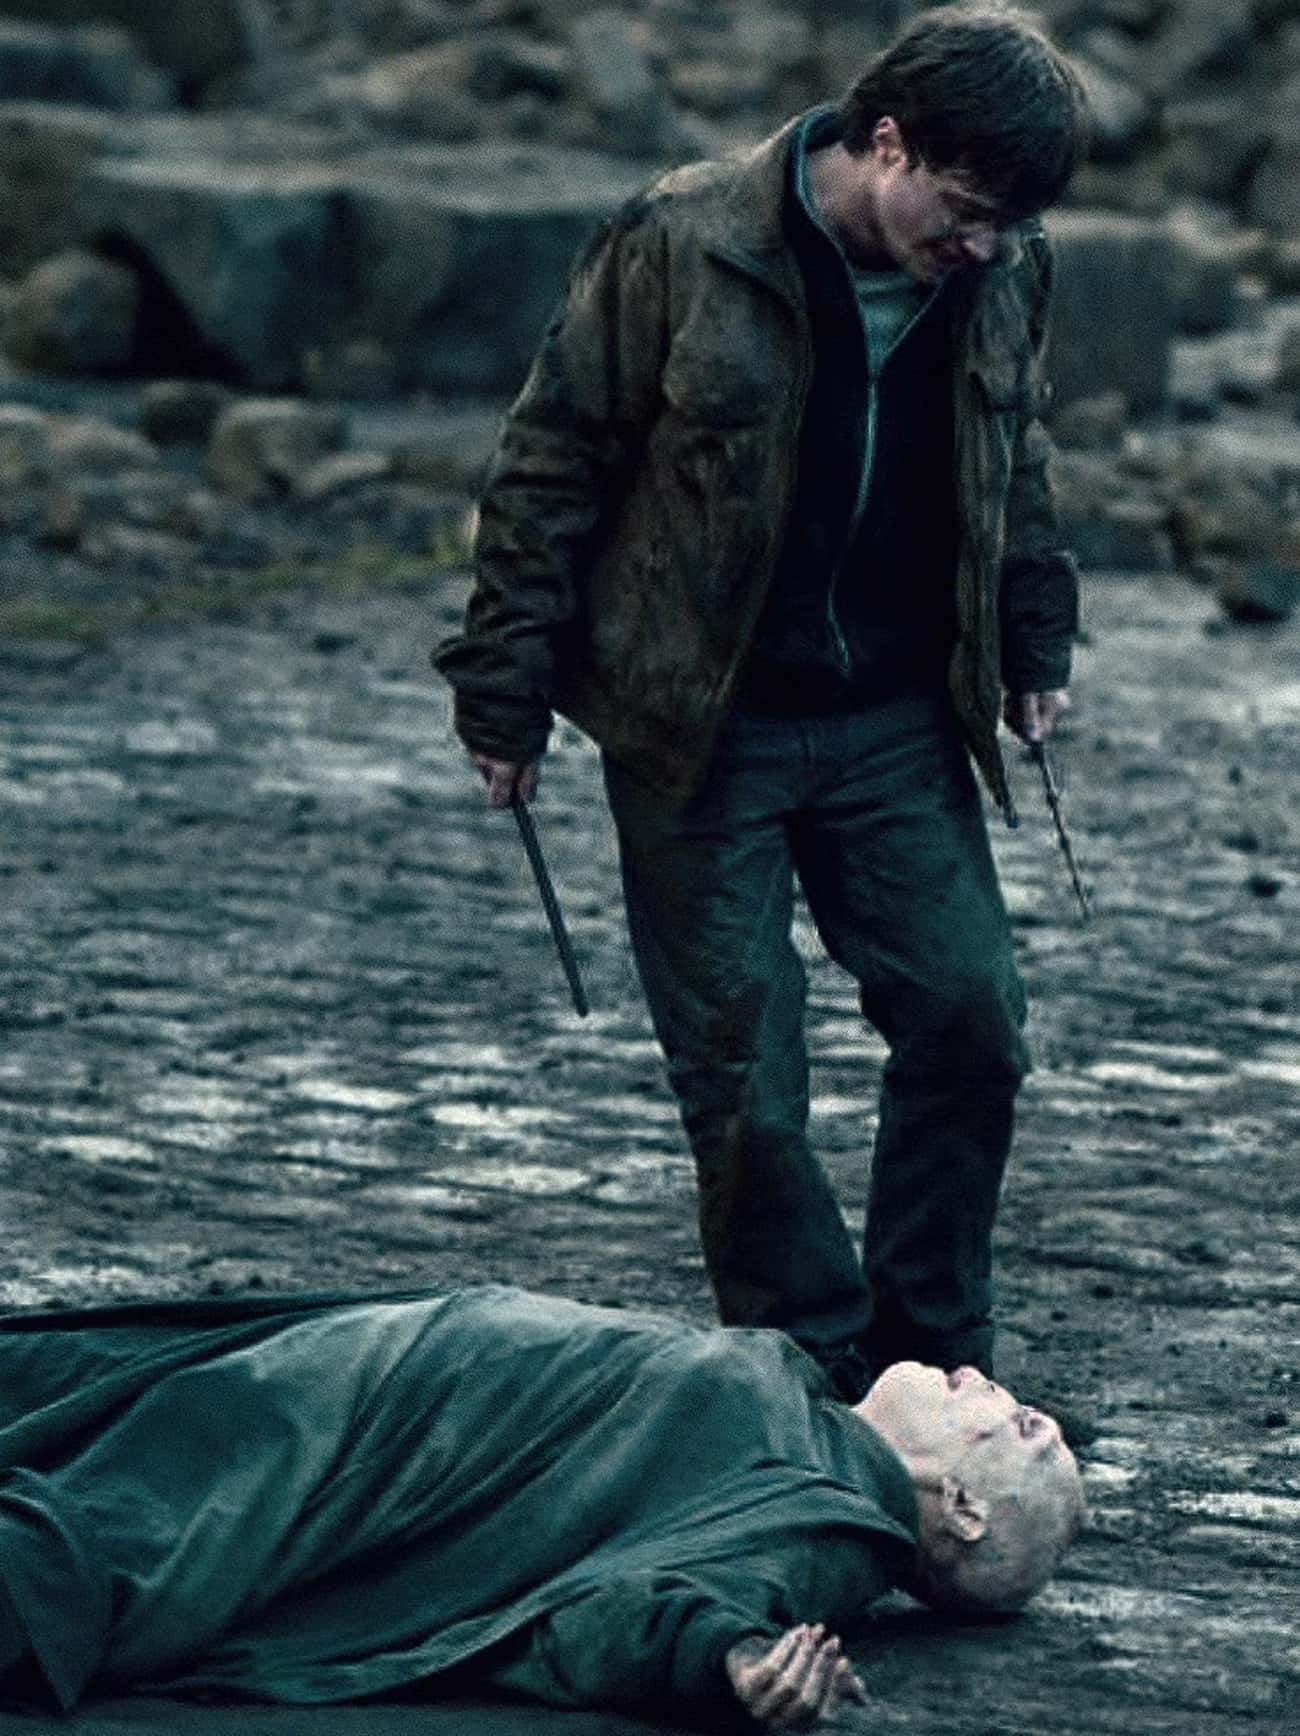 Voldemort's Body Is Carried Away After He Perishes